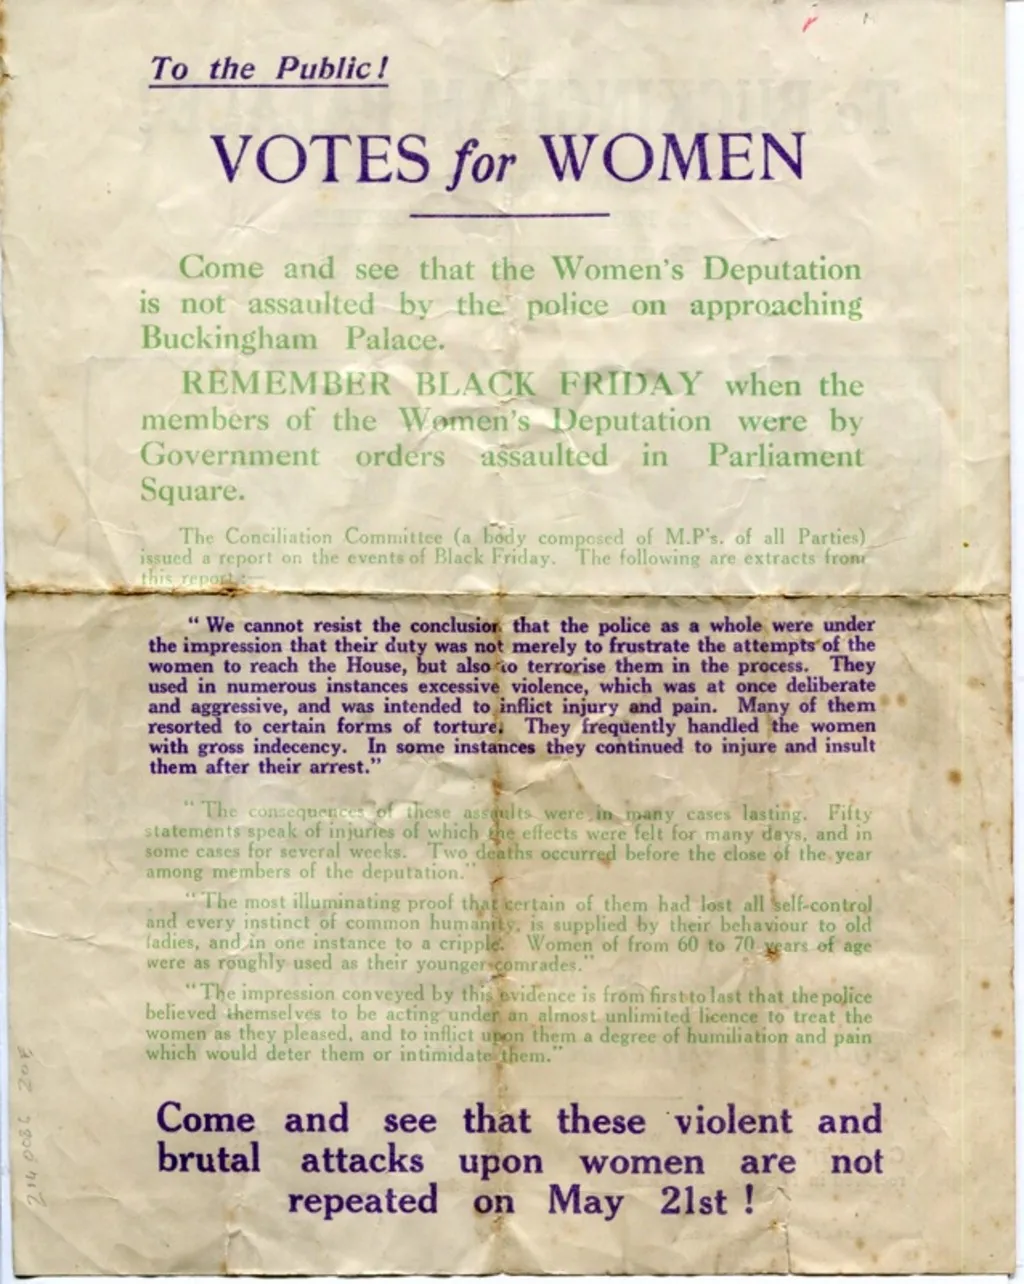 A leaflet printed in green and purple text entitled 'To the public! Votes for Women' and promoting an upcoming suffragette march at Buckingham Palace.